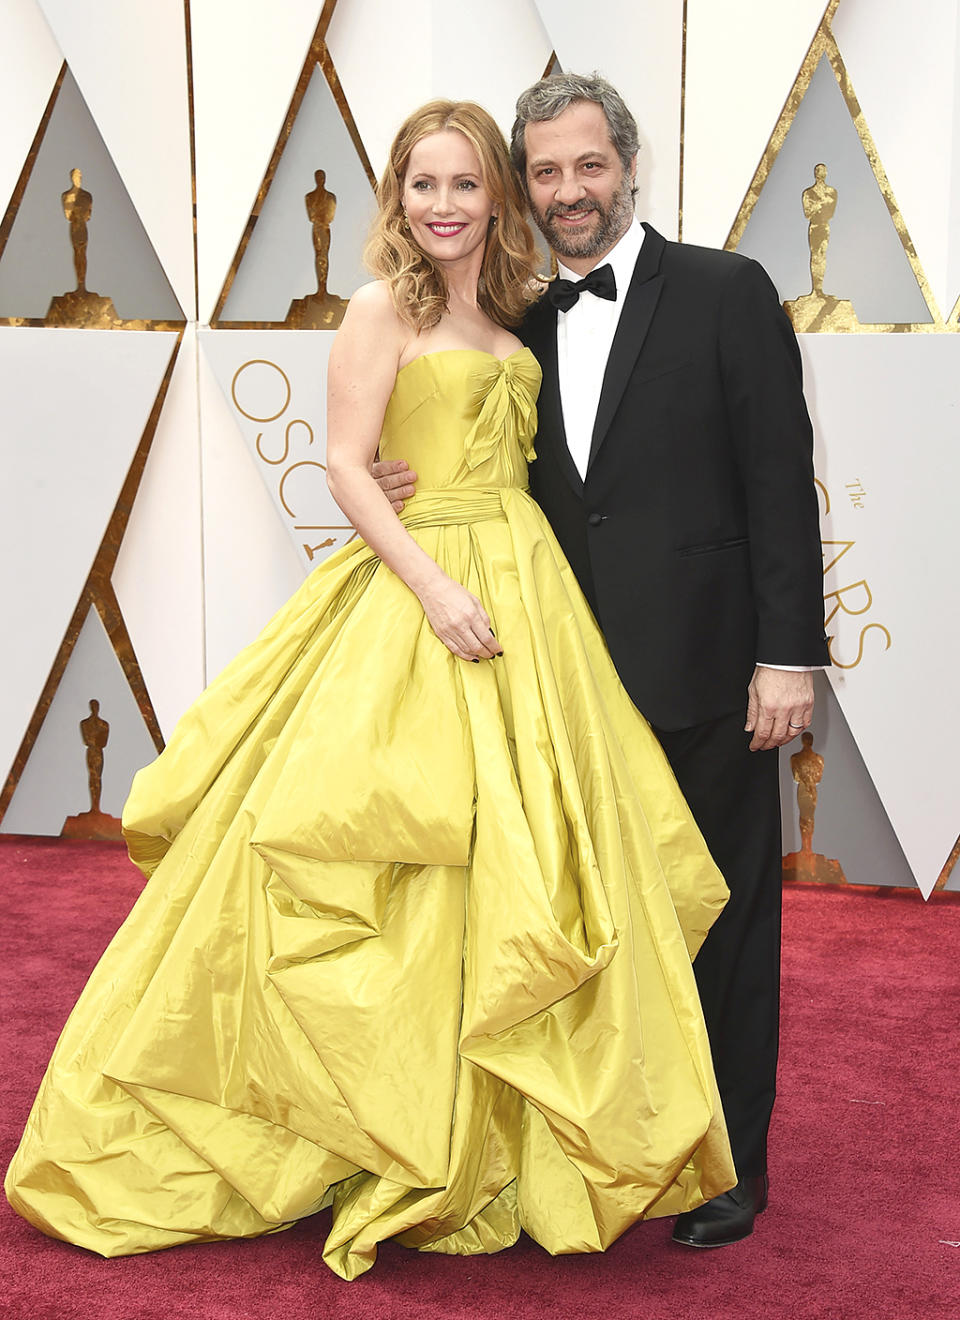 <p>Leslie Mann and Judd Apatow arrive at the Oscars on Sunday, Feb. 26, 2017, at the Dolby Theatre in Los Angeles. (Photo by Jordan Strauss/Invision/AP) </p>